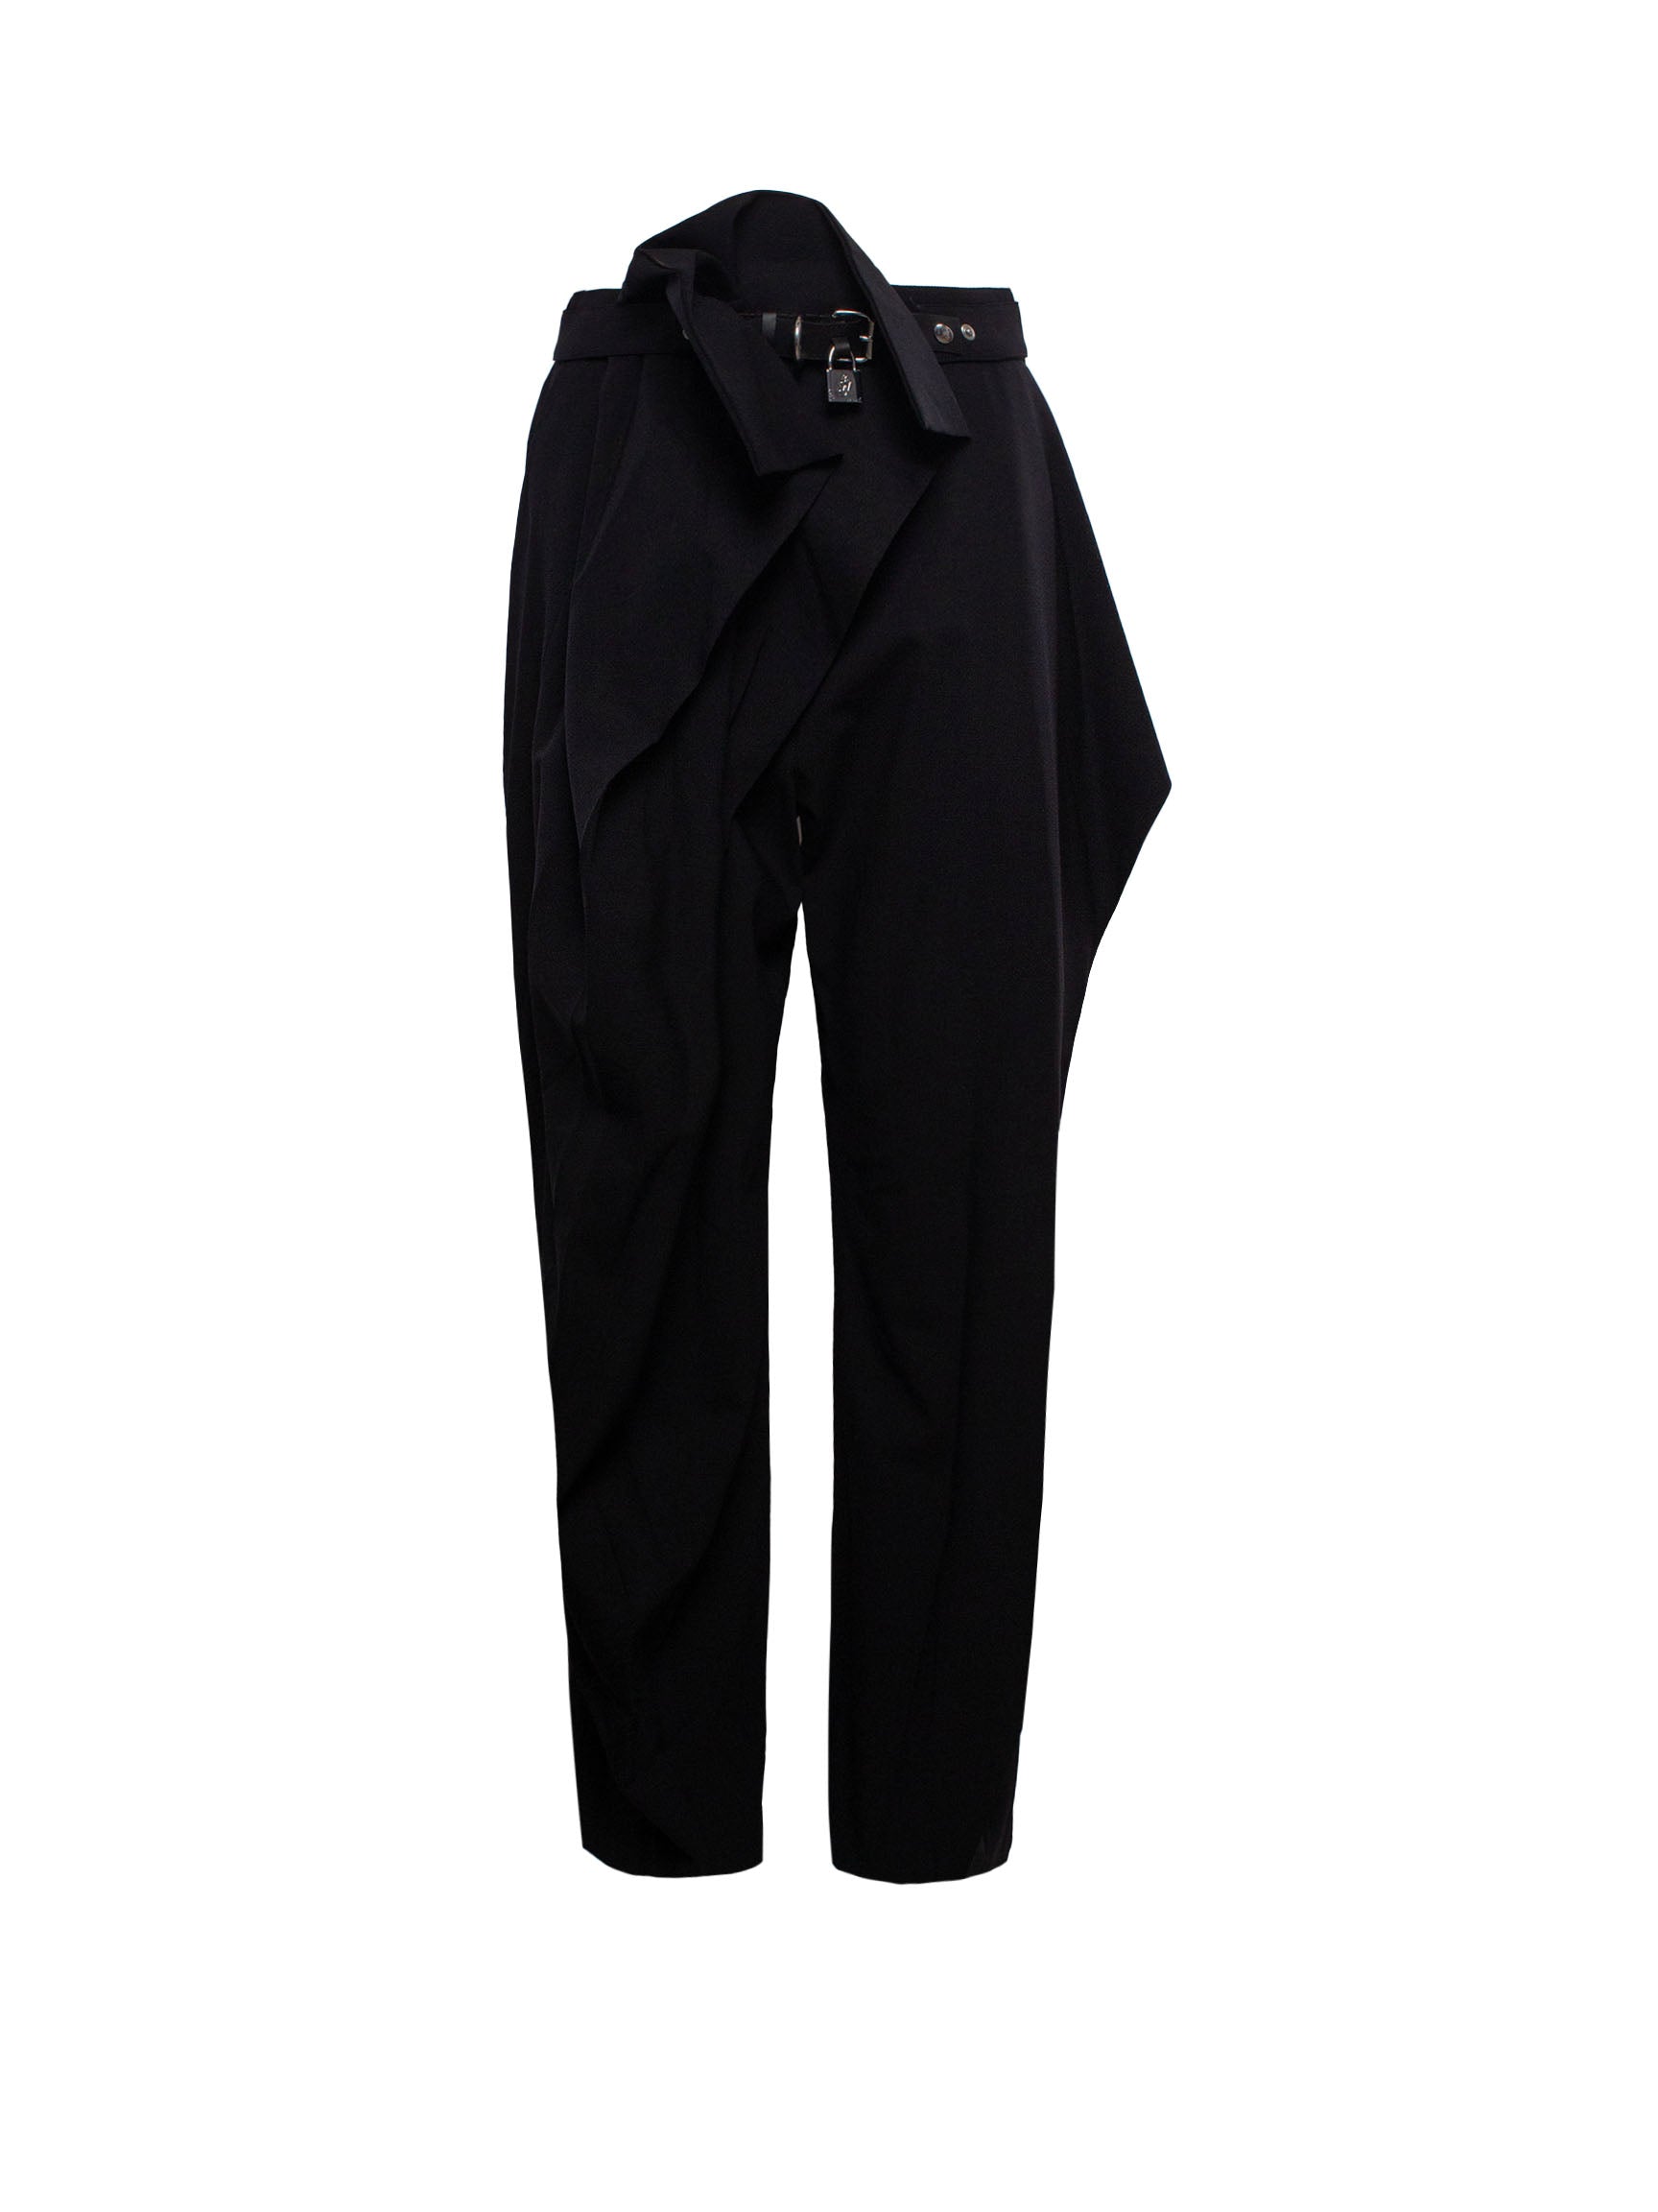 JW ANDERSON BELTED PADLOCK CARGO TROUSERS